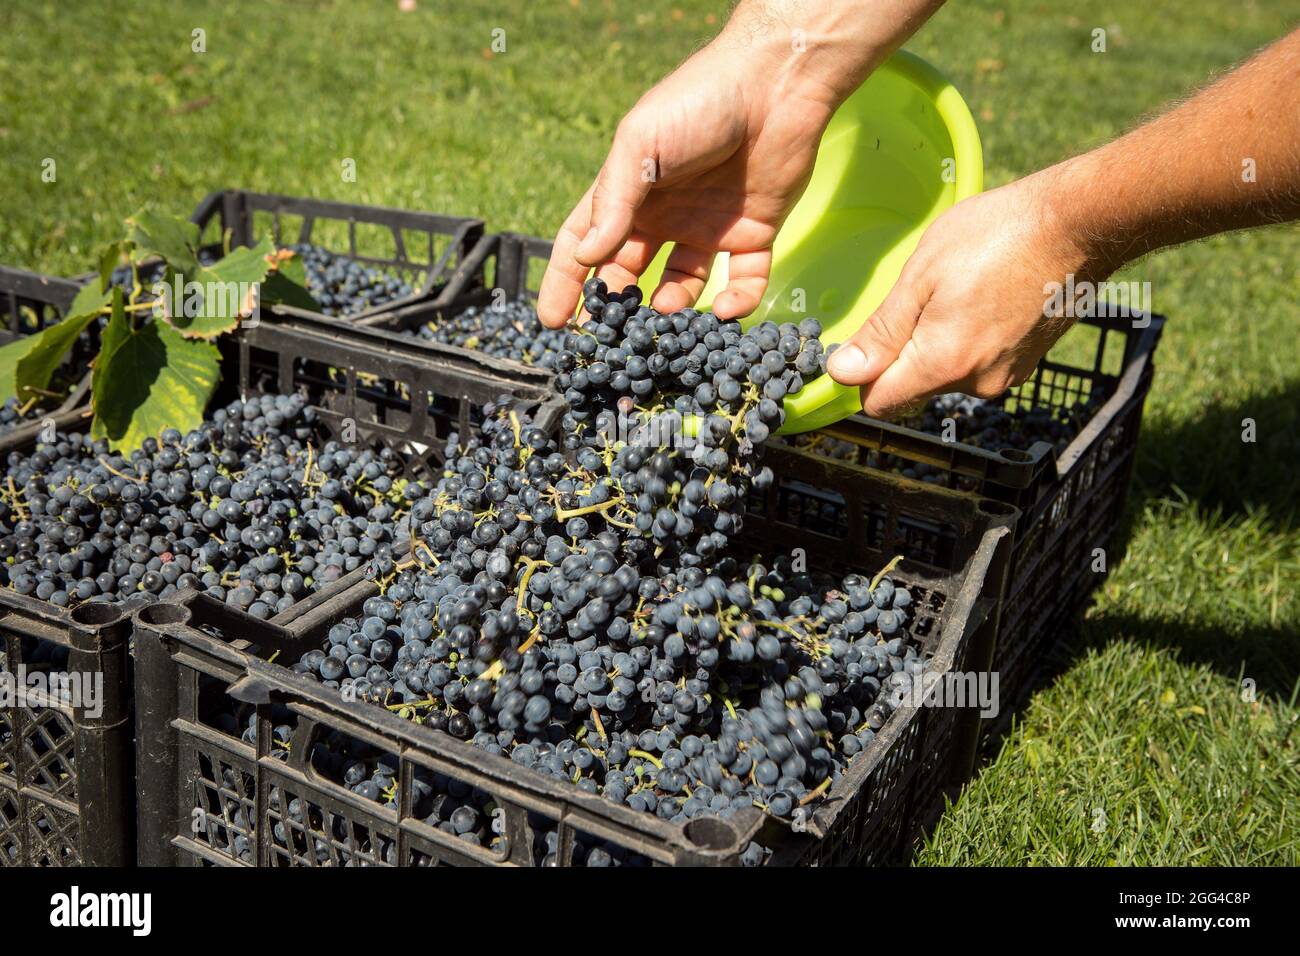 Grape harvest. The fruits collected by hand are laid out in a container. Wine grapes are collected in boxes. Autumn is the time of grape harvest and w Stock Photo